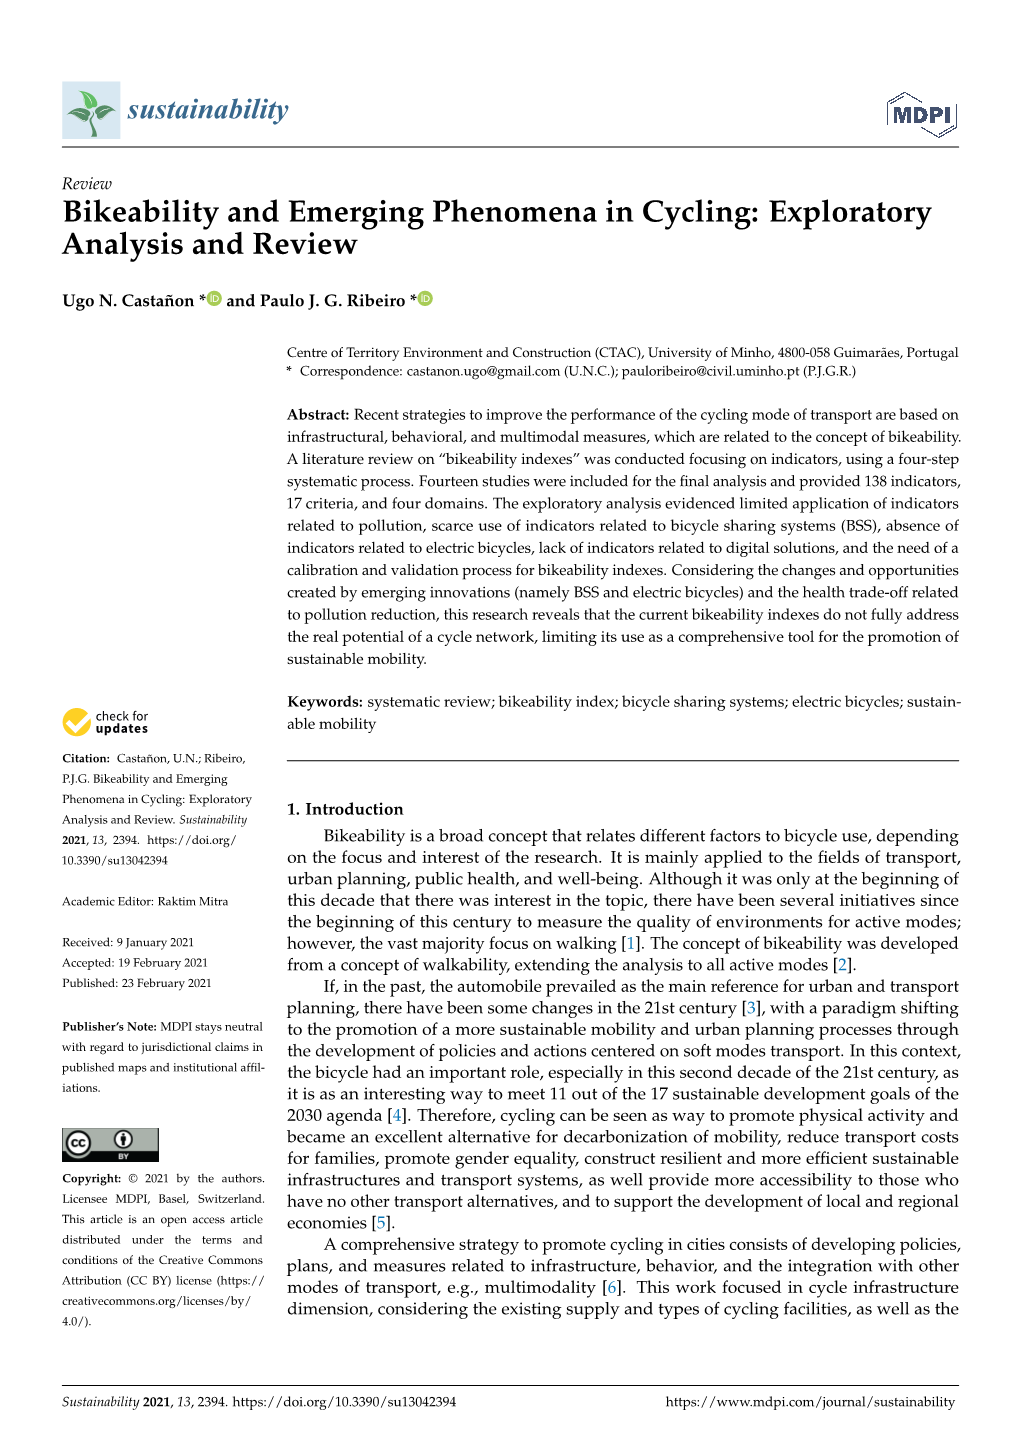 Bikeability and Emerging Phenomena in Cycling: Exploratory Analysis and Review